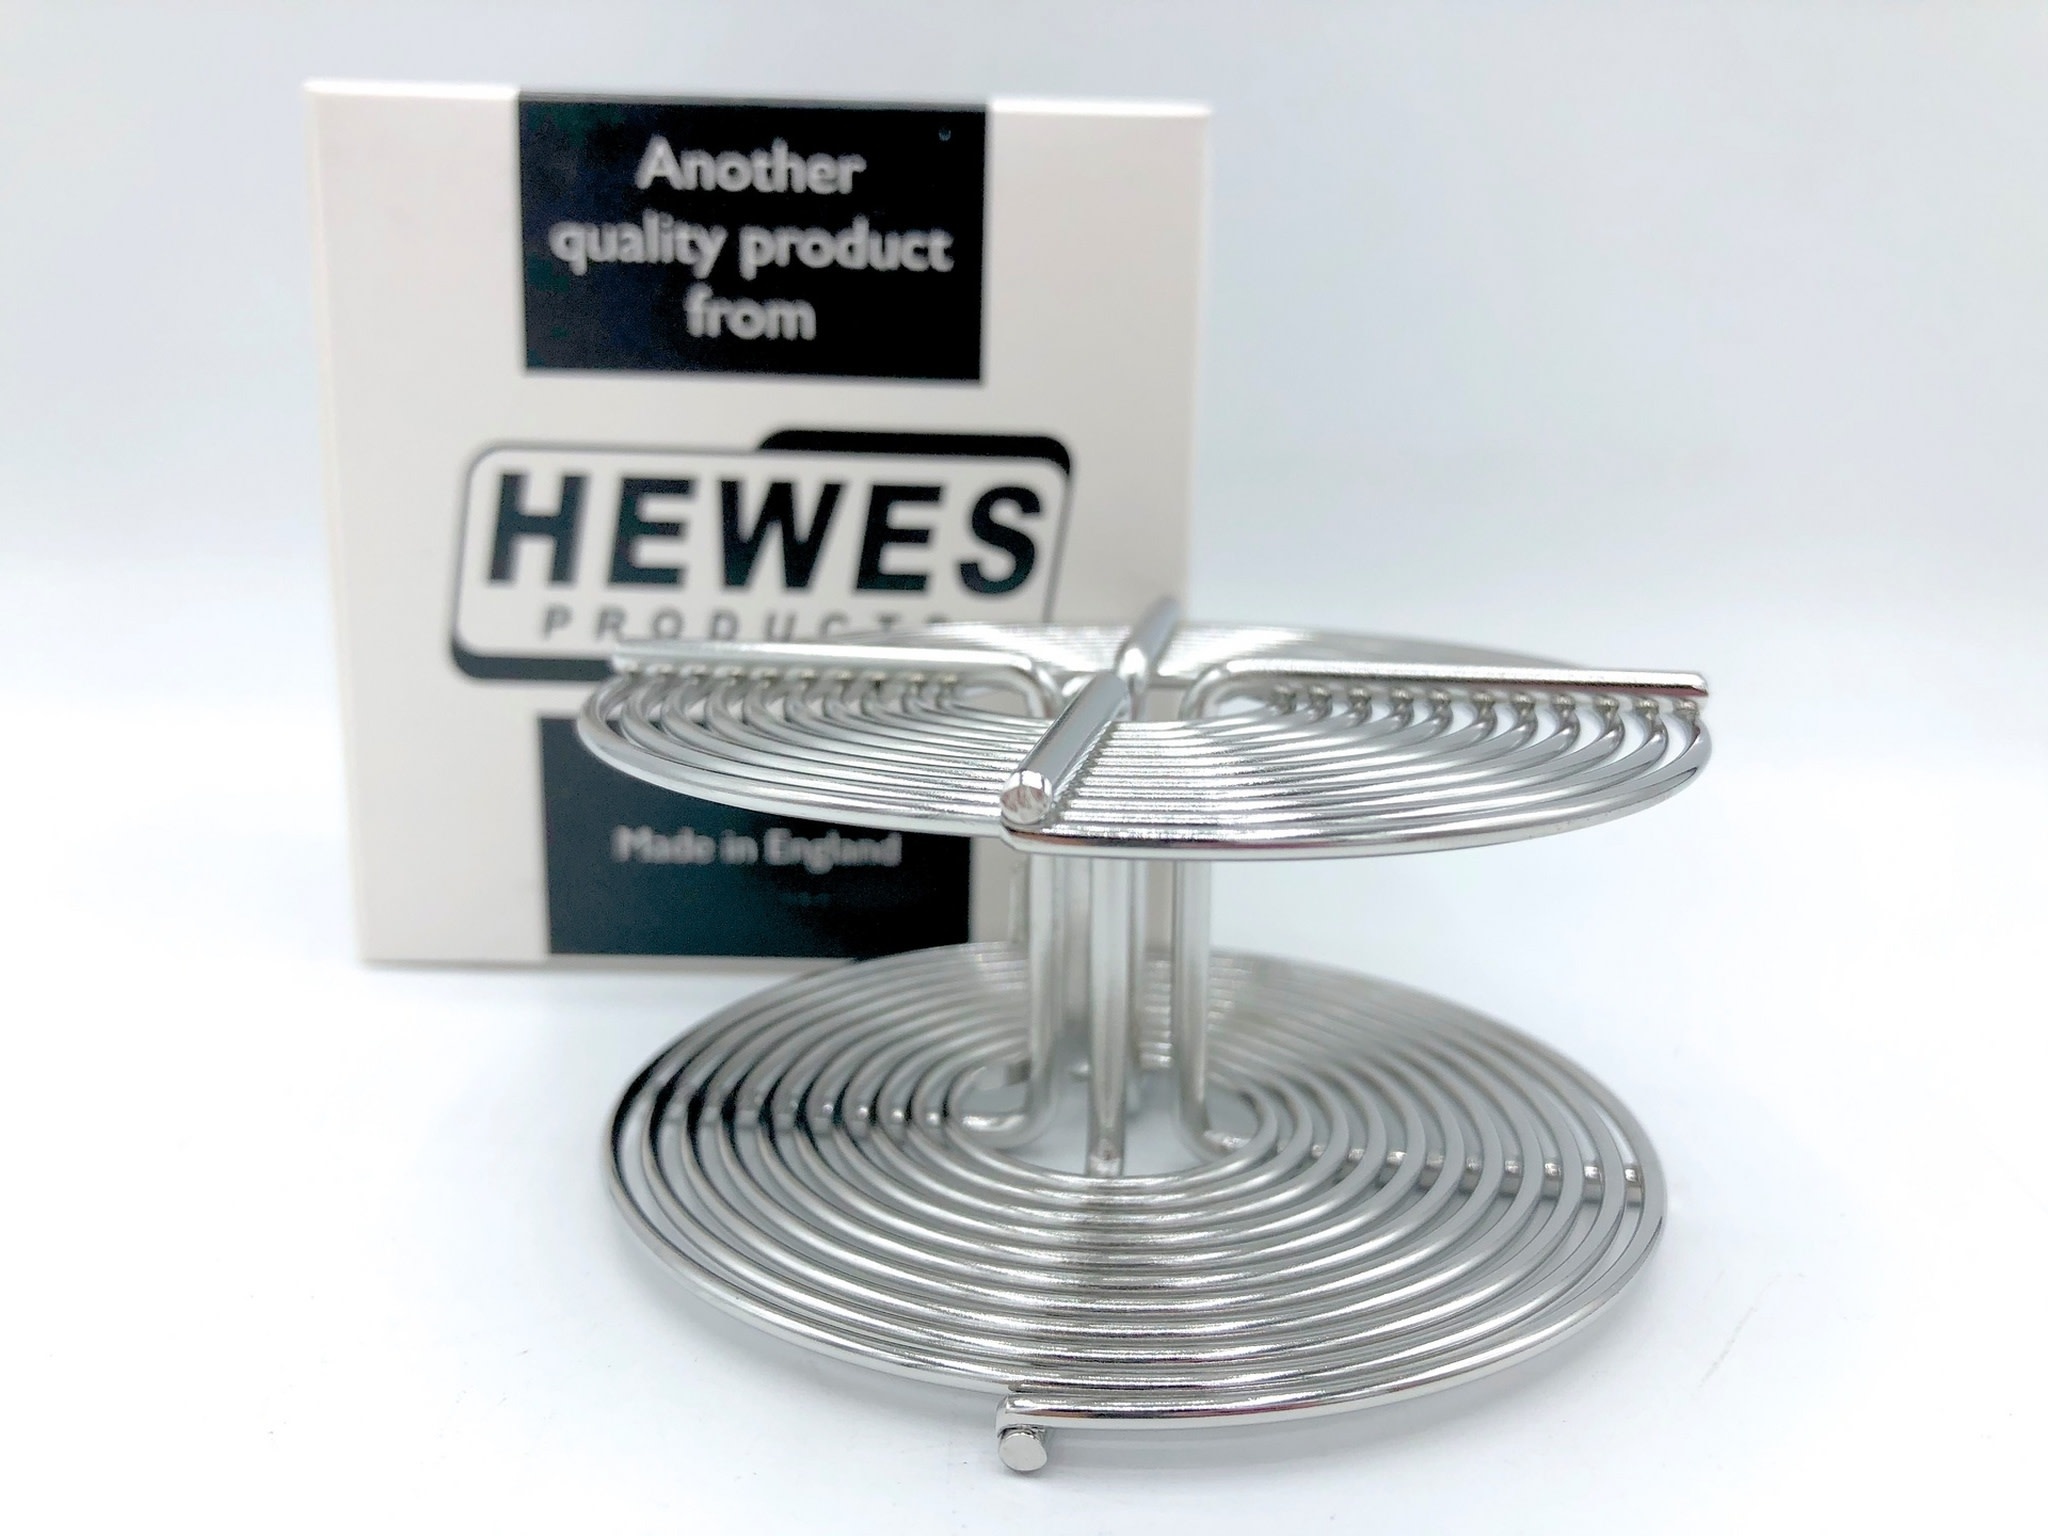 Hewes Hewes Pro SS 35mm Reel - Looking Glass Photo & Camera